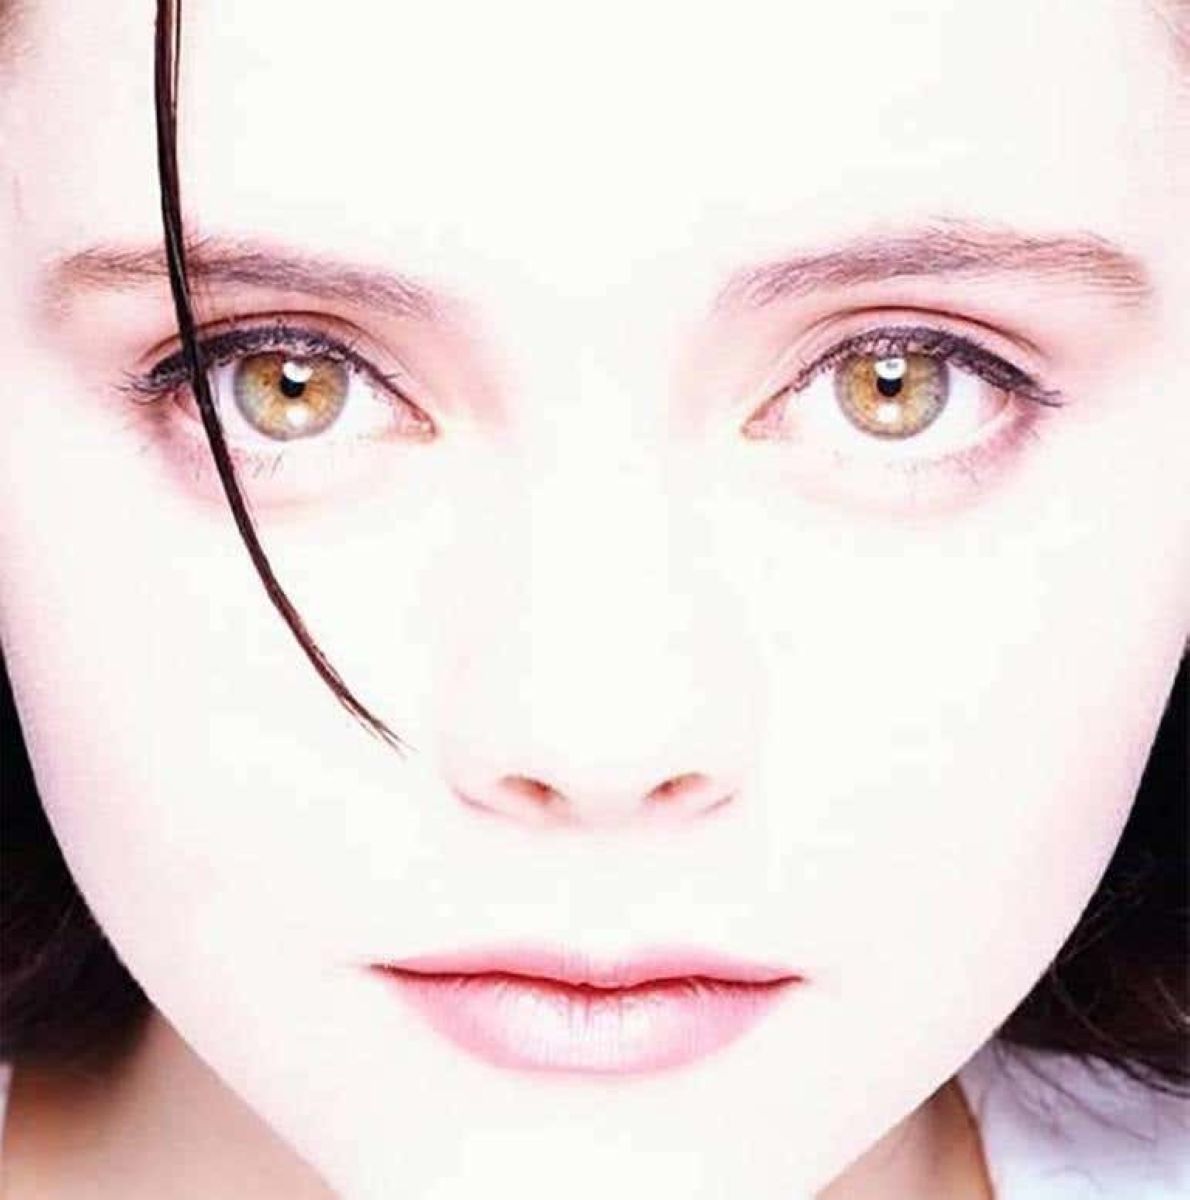 Christina Ricci by Terry O'Neill, closeup portrait of the actress